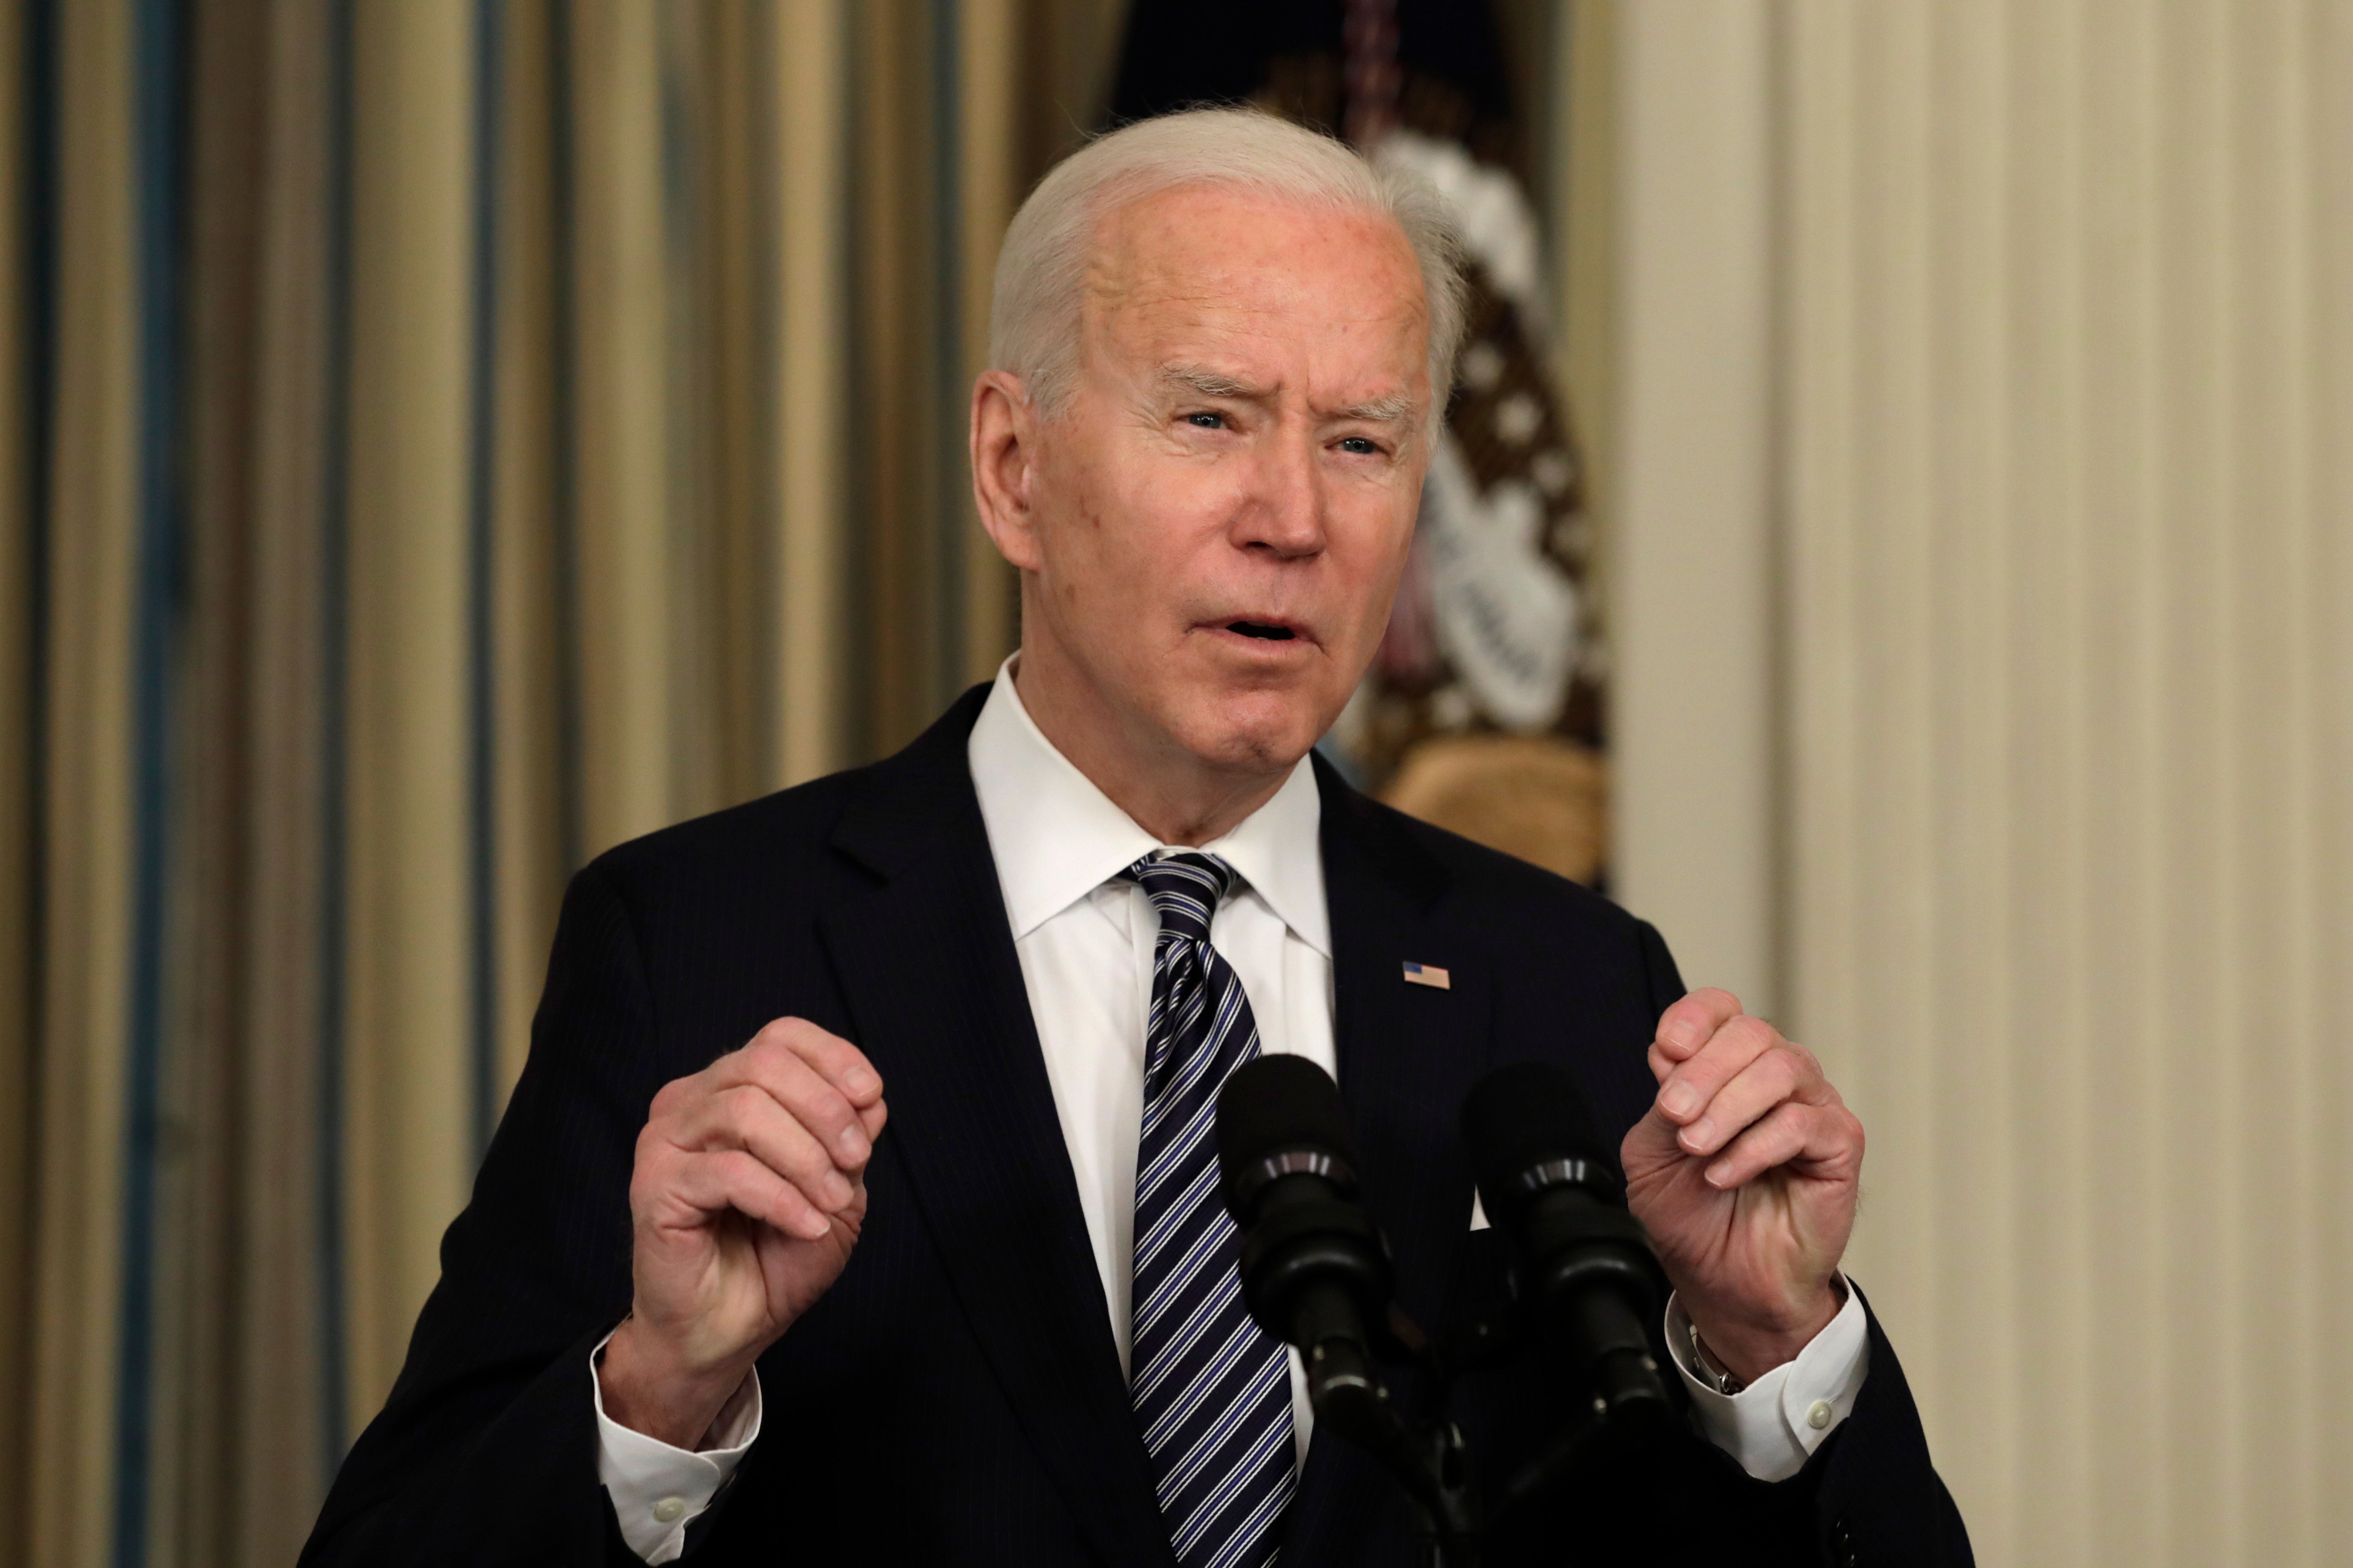 Biden may insist on the two nations returning the favour later in the year